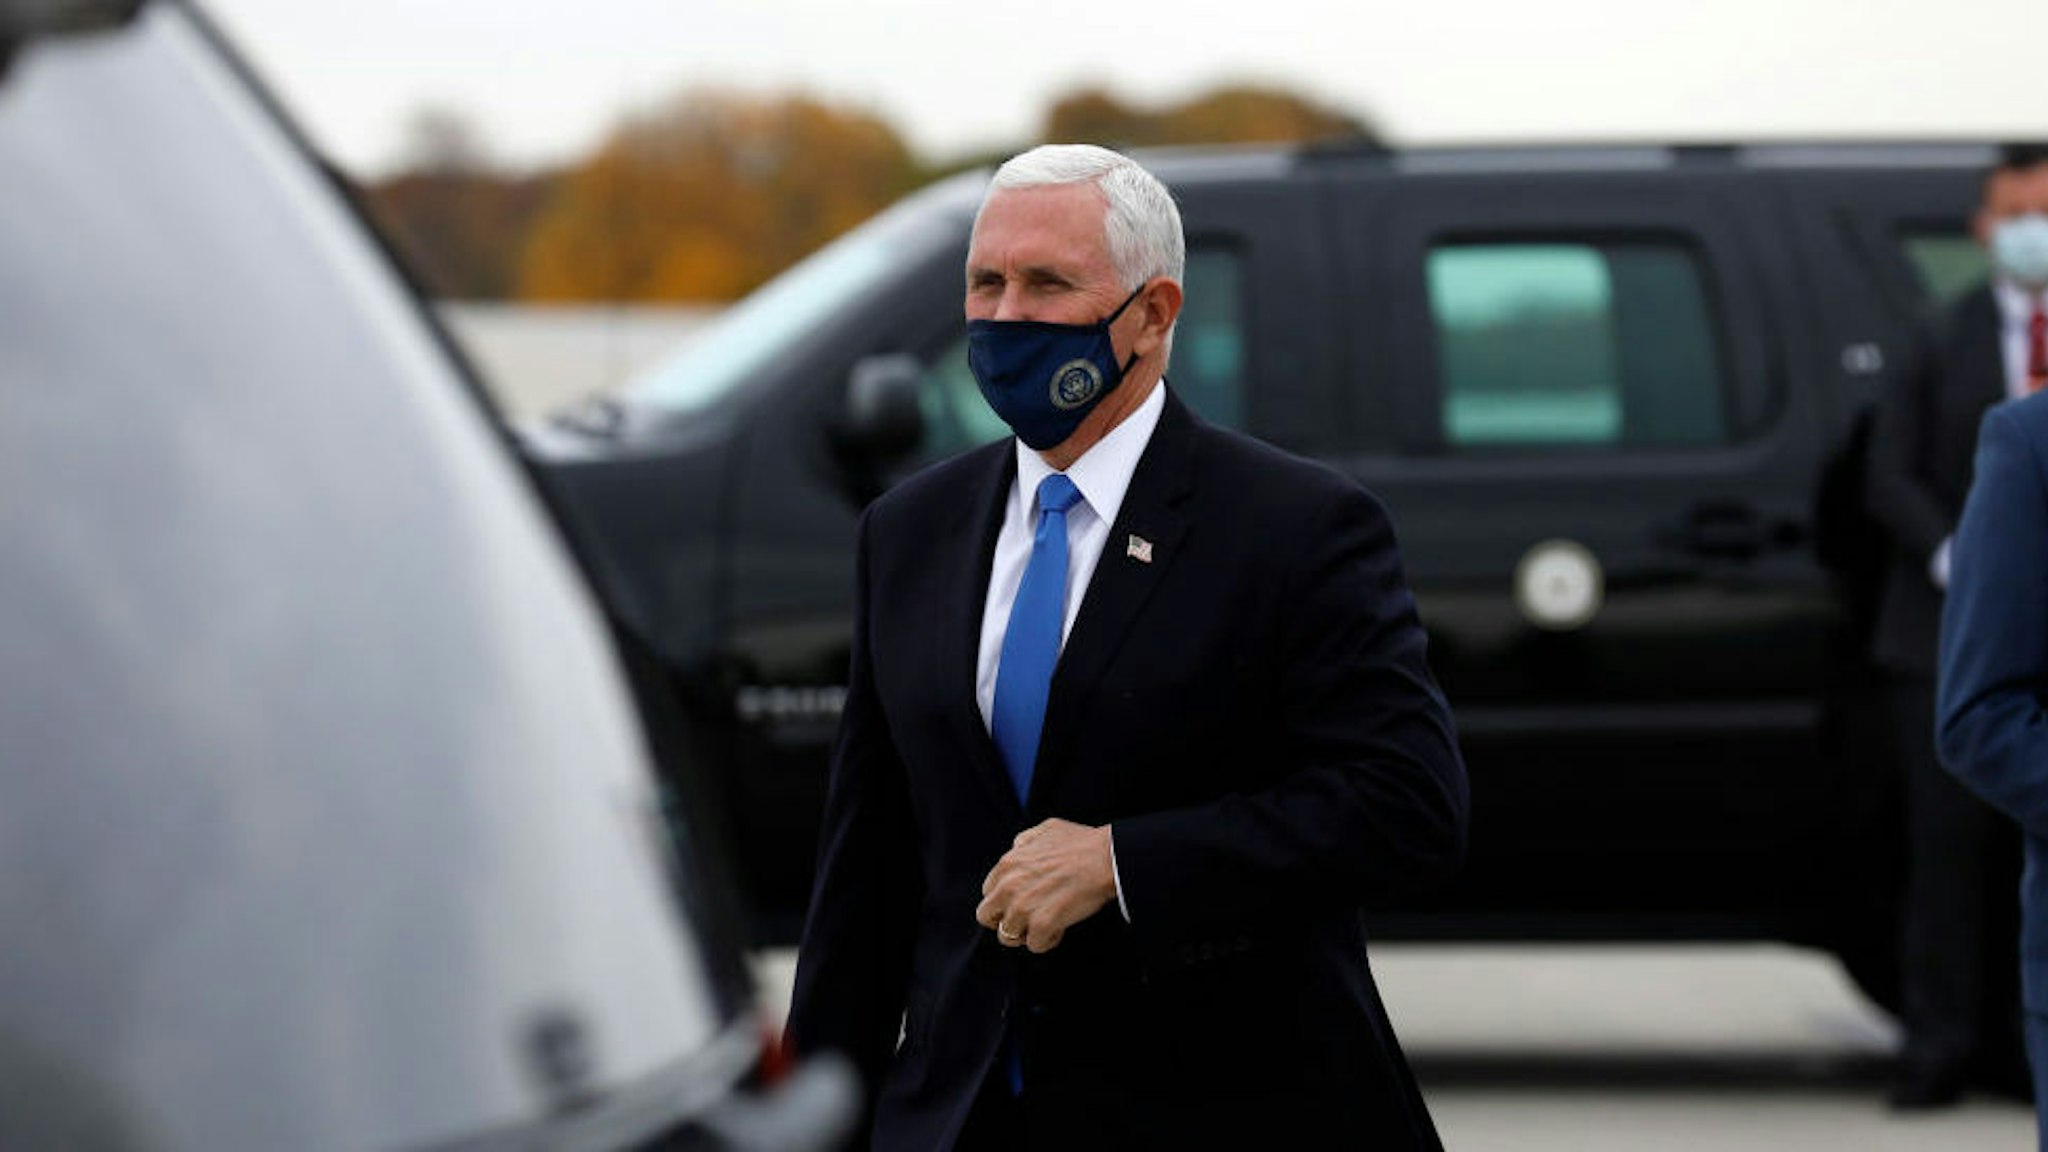 US Vice President Mike Pence arrives at Gerald Ford Airport in Grand Rapids, Michigan, on October 14, 2020. (Photo by JEFF KOWALSKY / AFP)